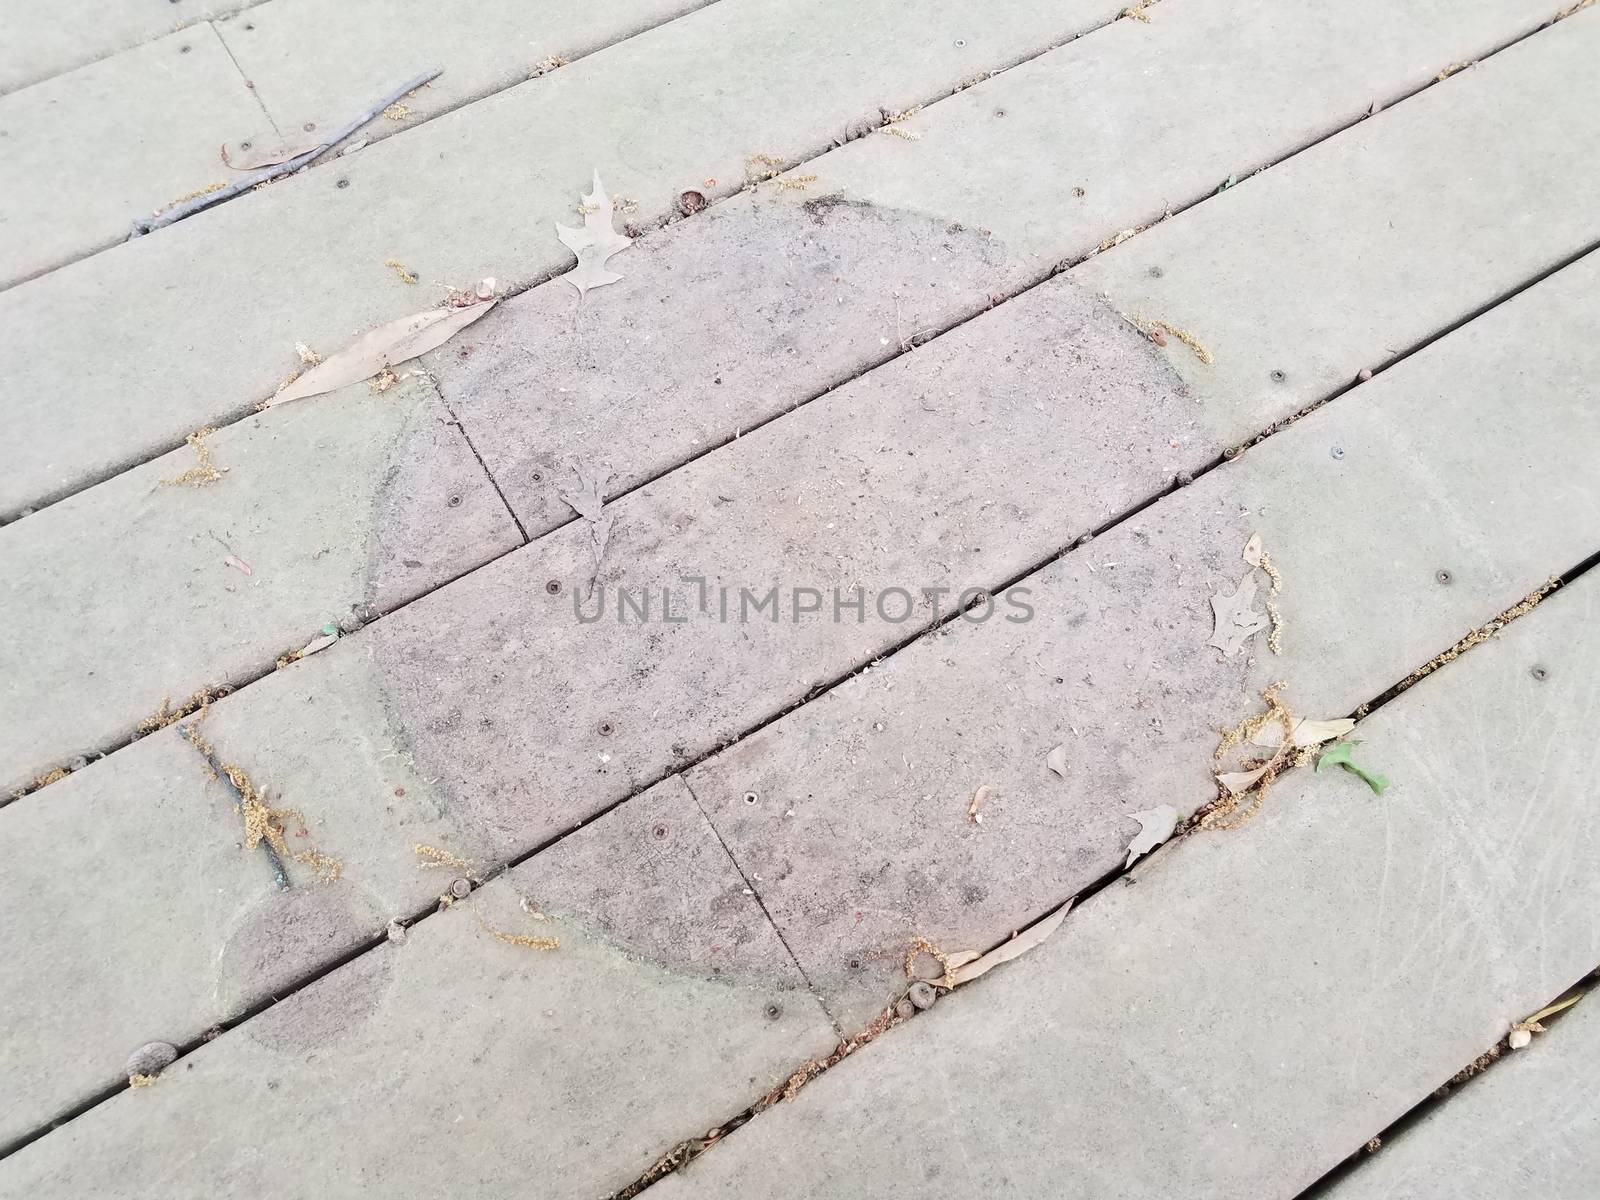 discolored or worn or weathered wood deck boards with algae and circular shape by stockphotofan1